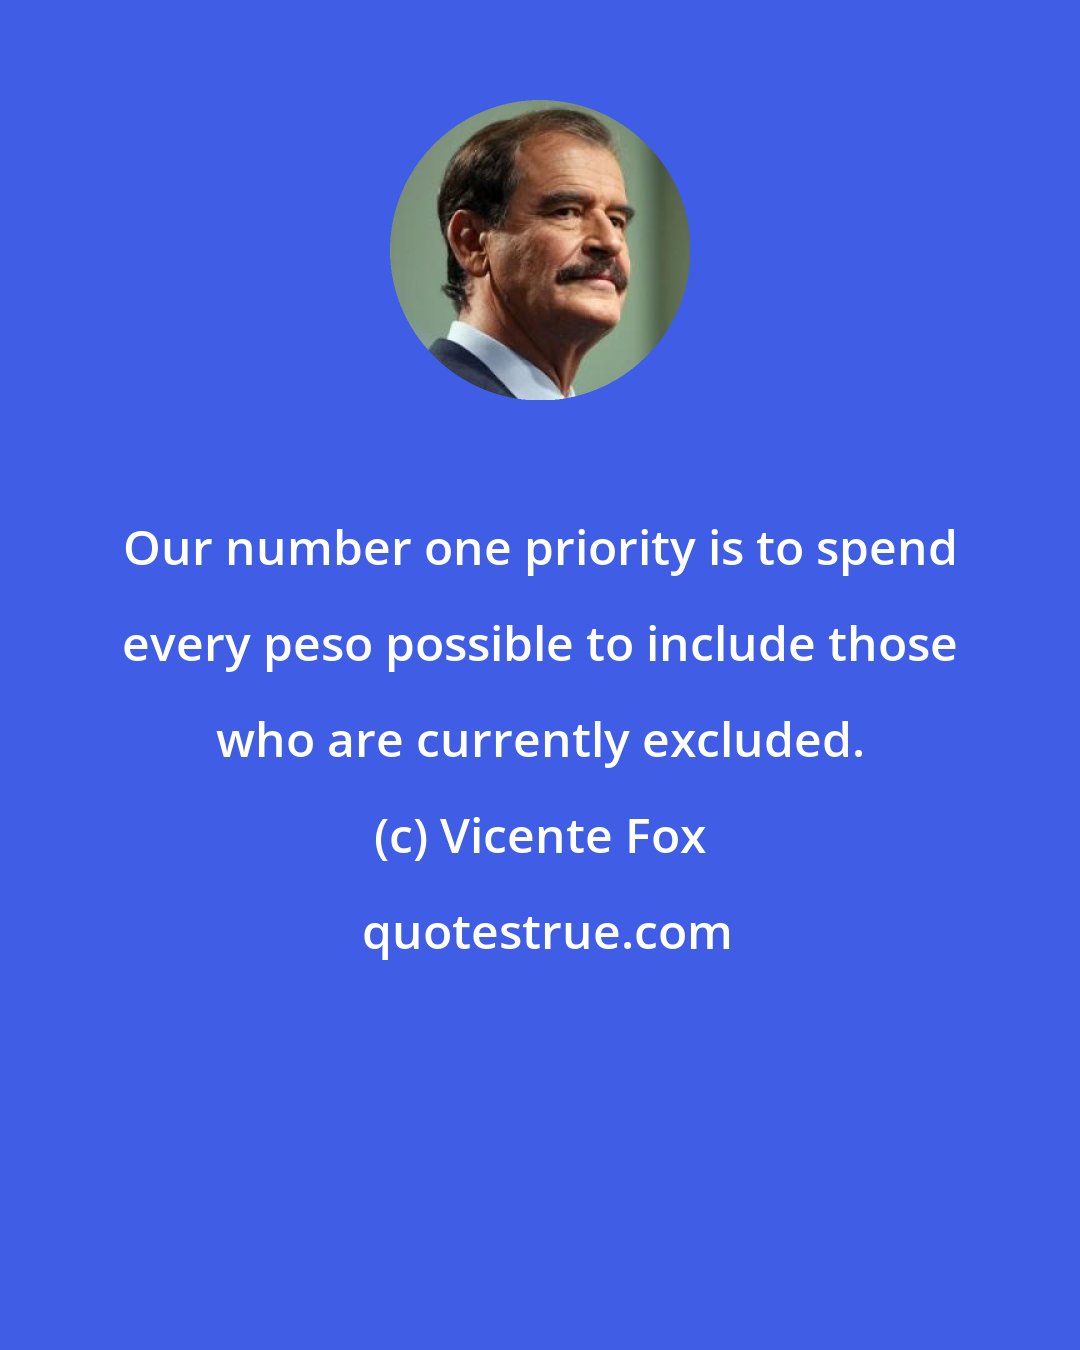 Vicente Fox: Our number one priority is to spend every peso possible to include those who are currently excluded.